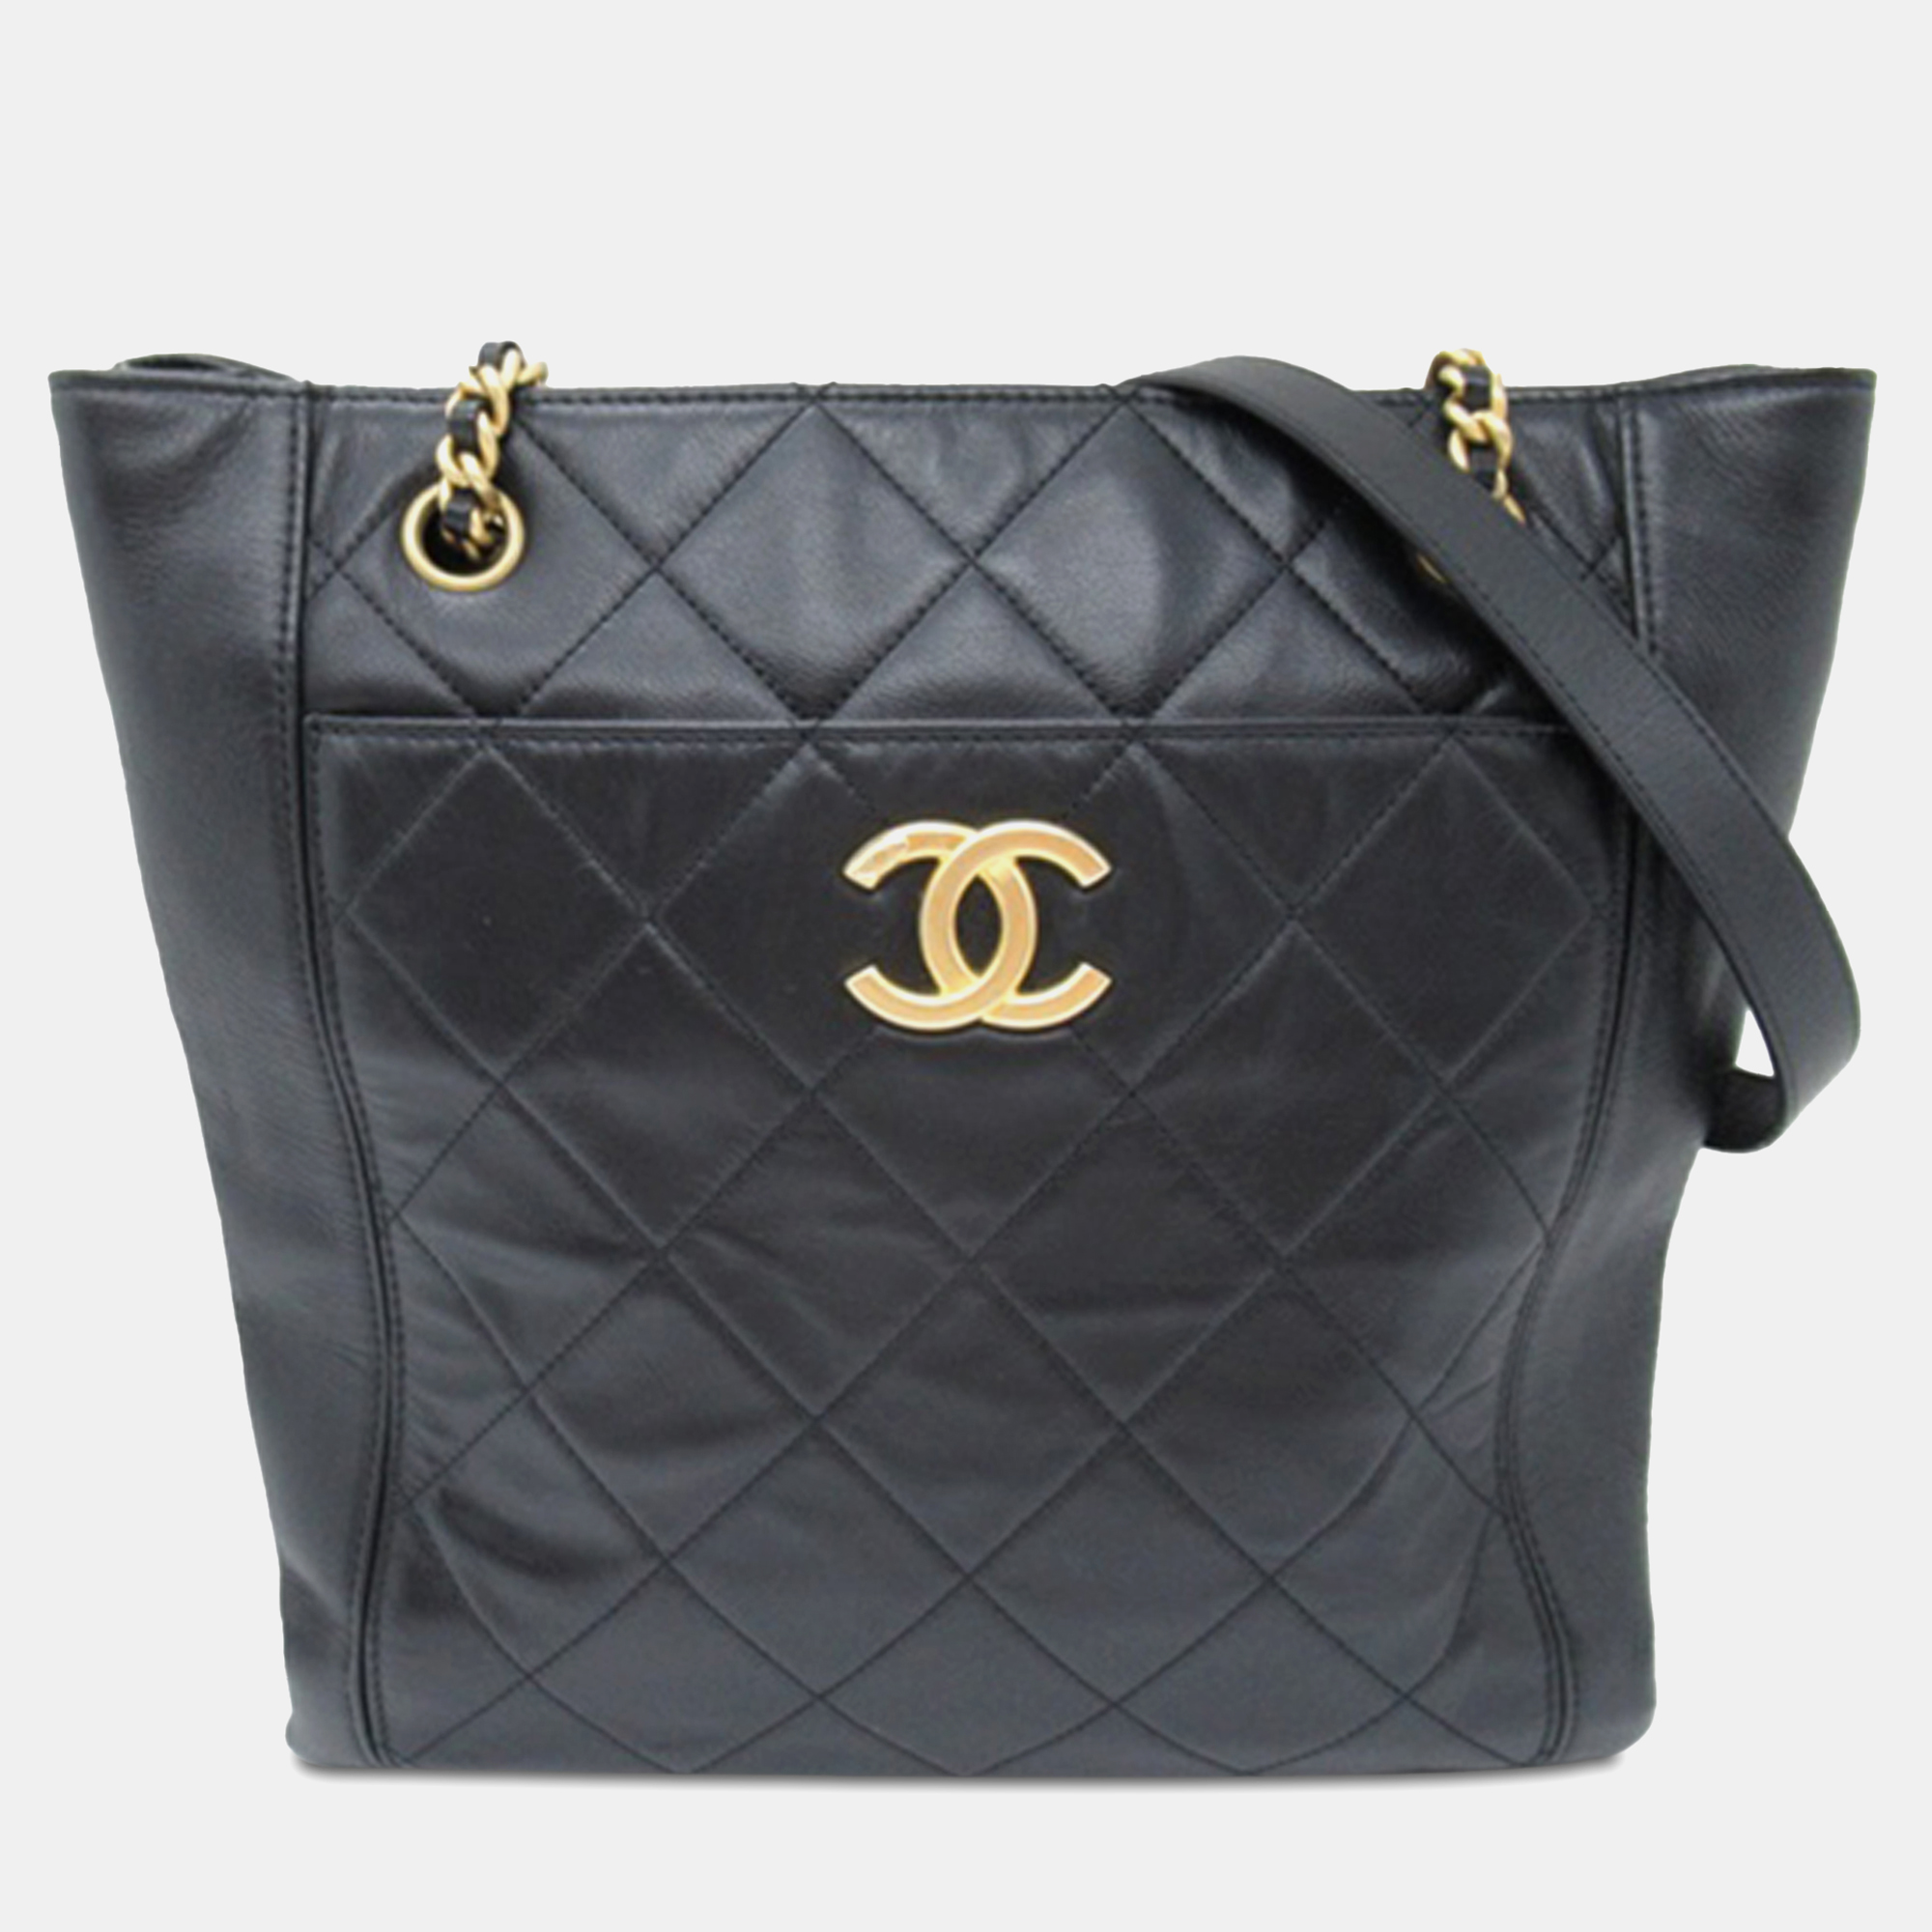 Chanel cc calfskin front pocket shopping tote